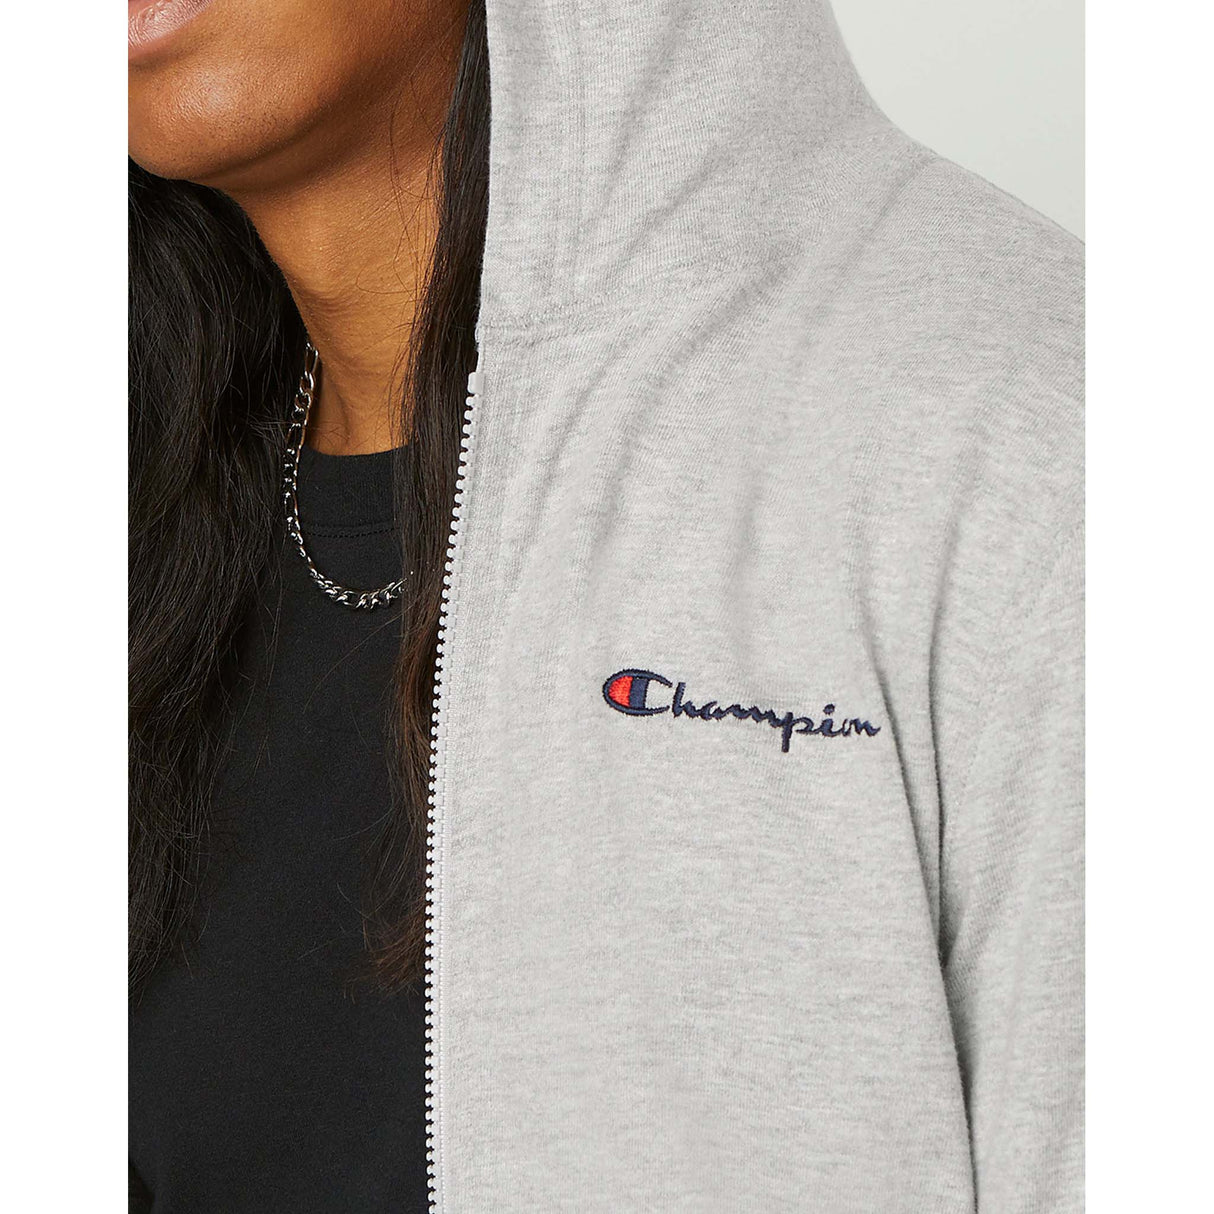 Champion Middleweight T-shirt Hoodie gris oxford homme details